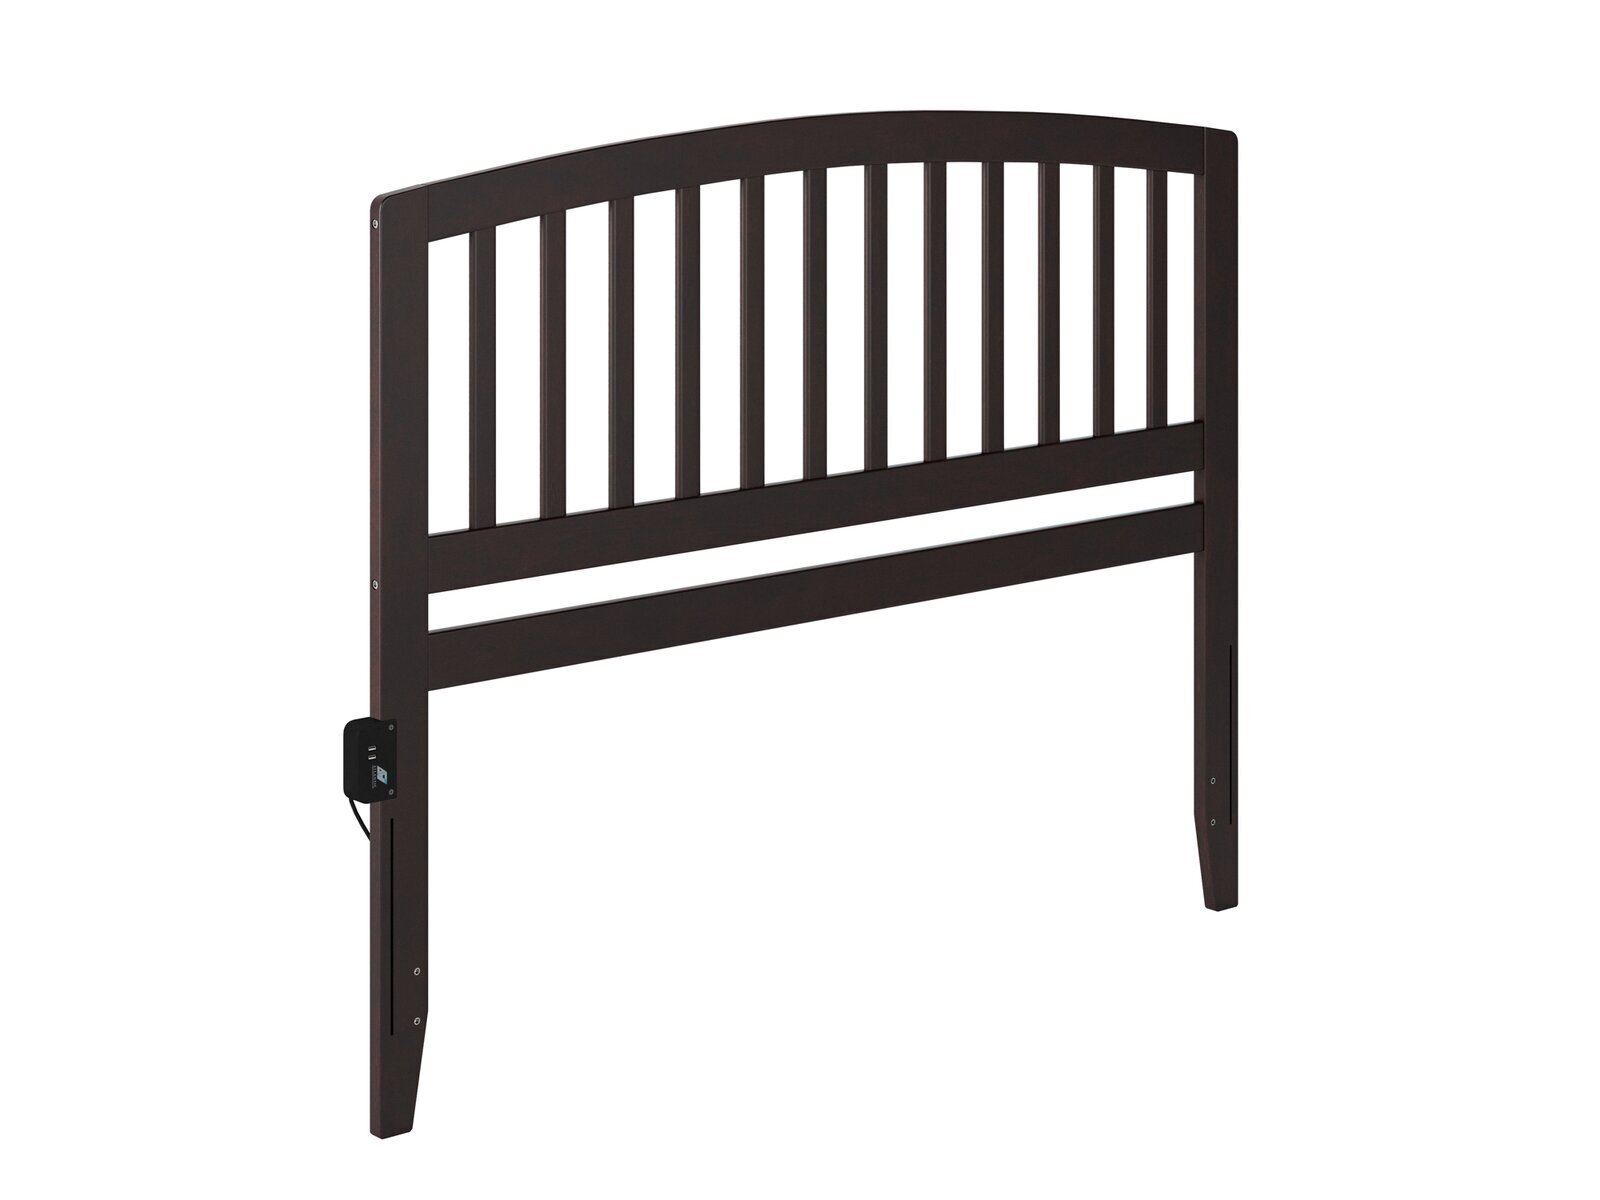 Curved mission style queen headboard